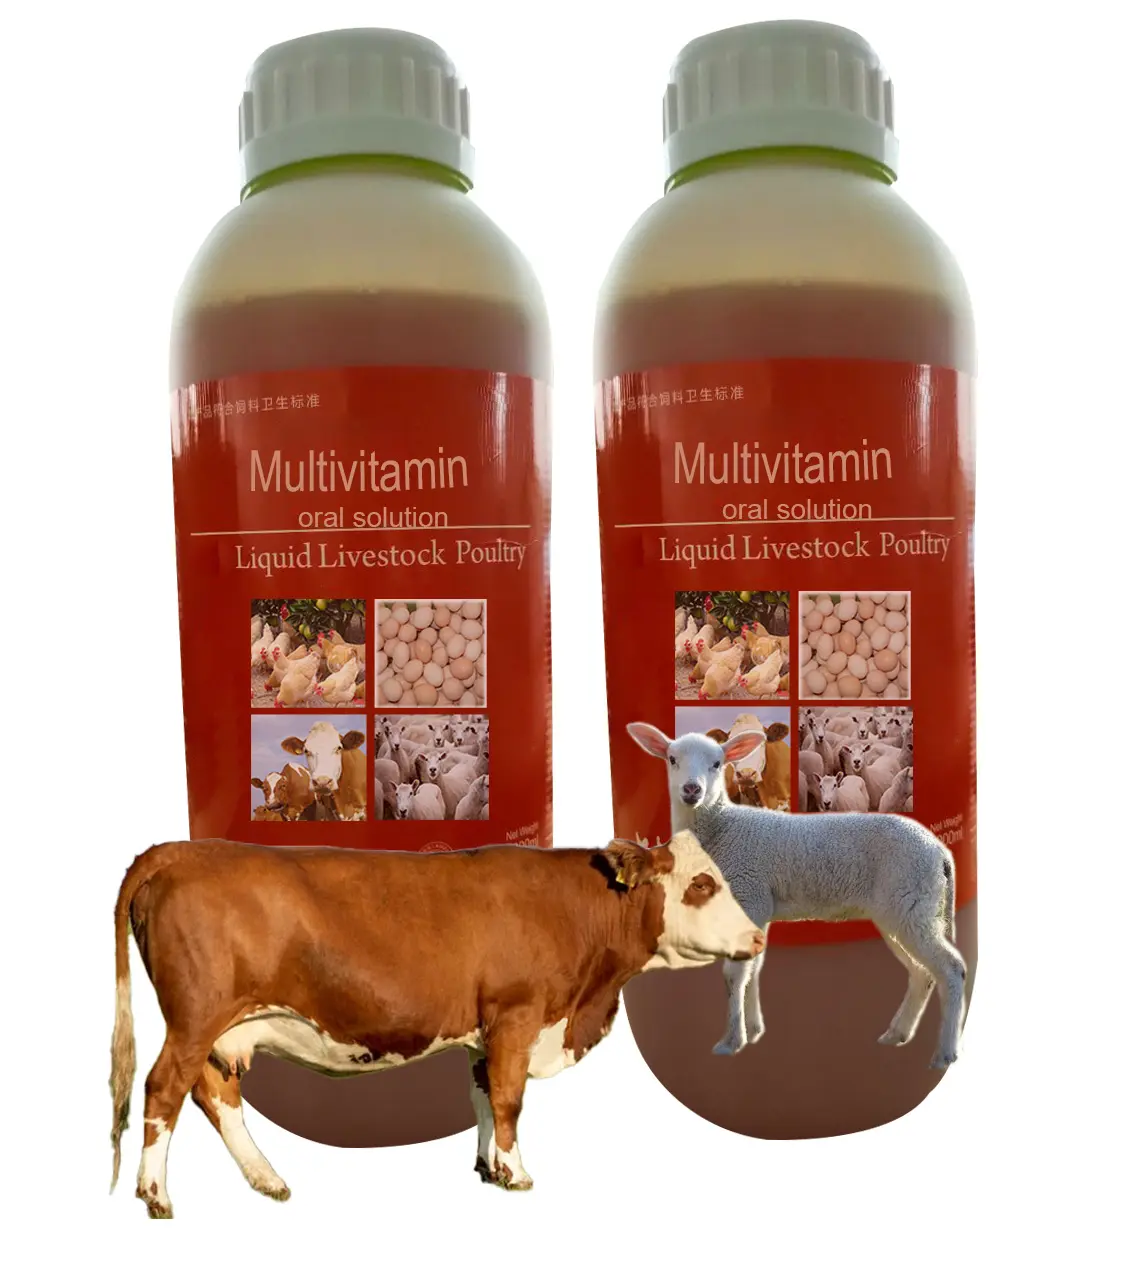 multivitamin oral liquid nutrition supplement animal manufacturer for poultry and livestock to growing fast